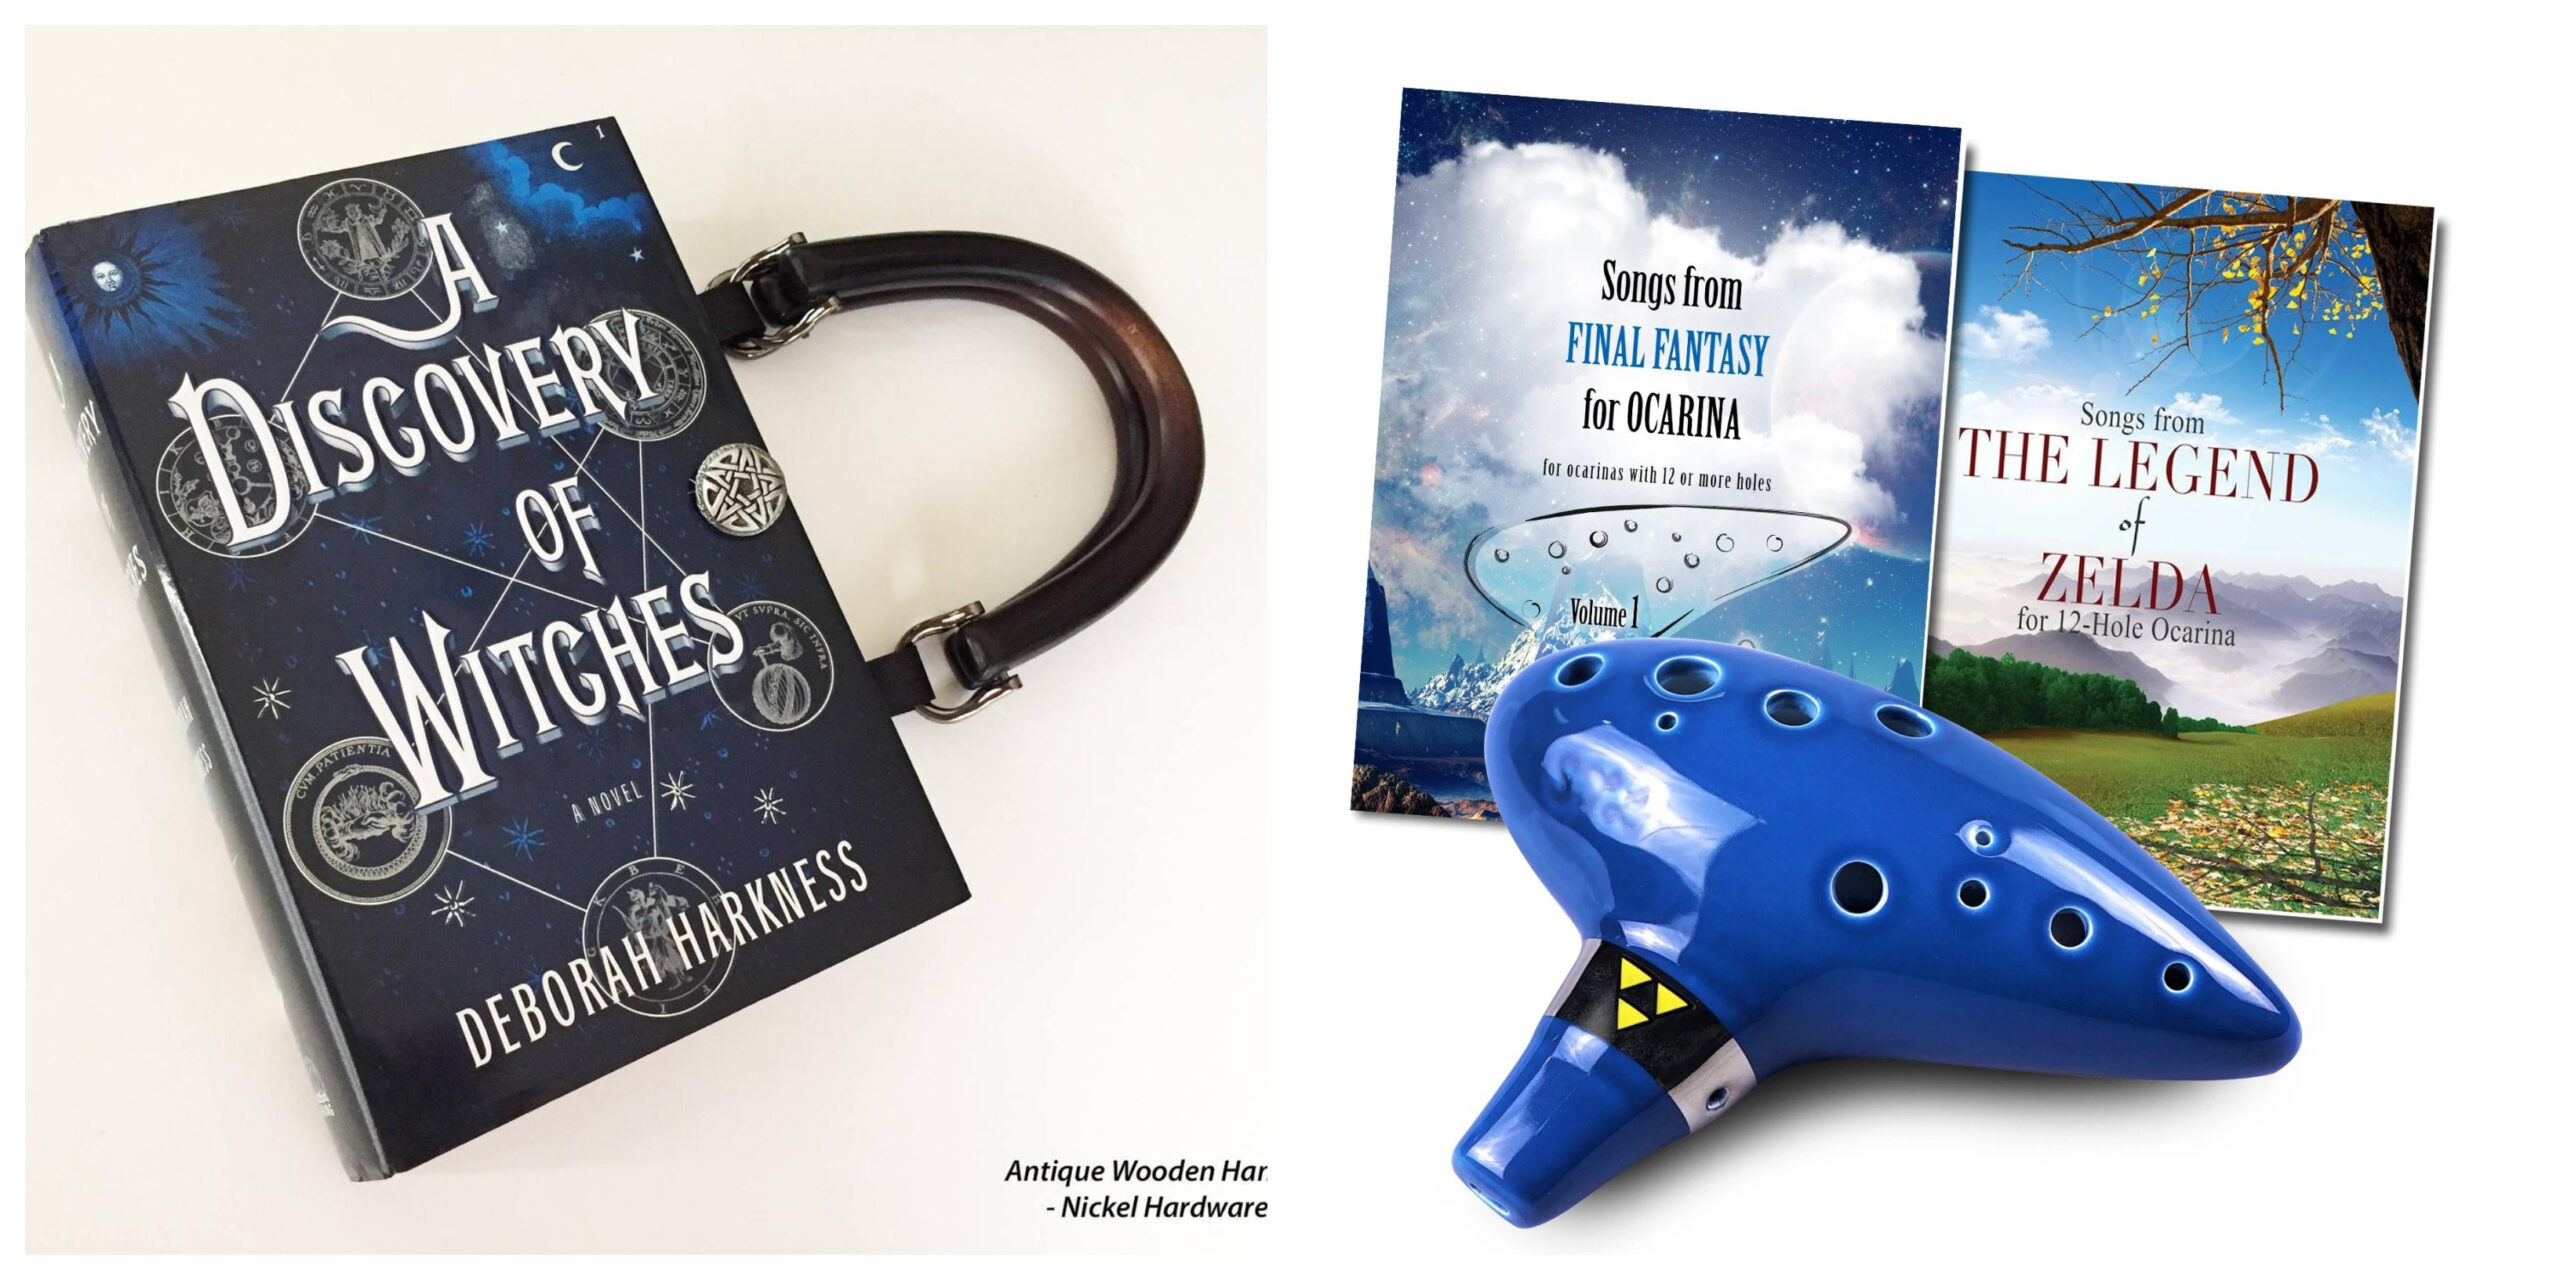 A Discovery of Witches Book Purse and Legend of Zelda Ocarina